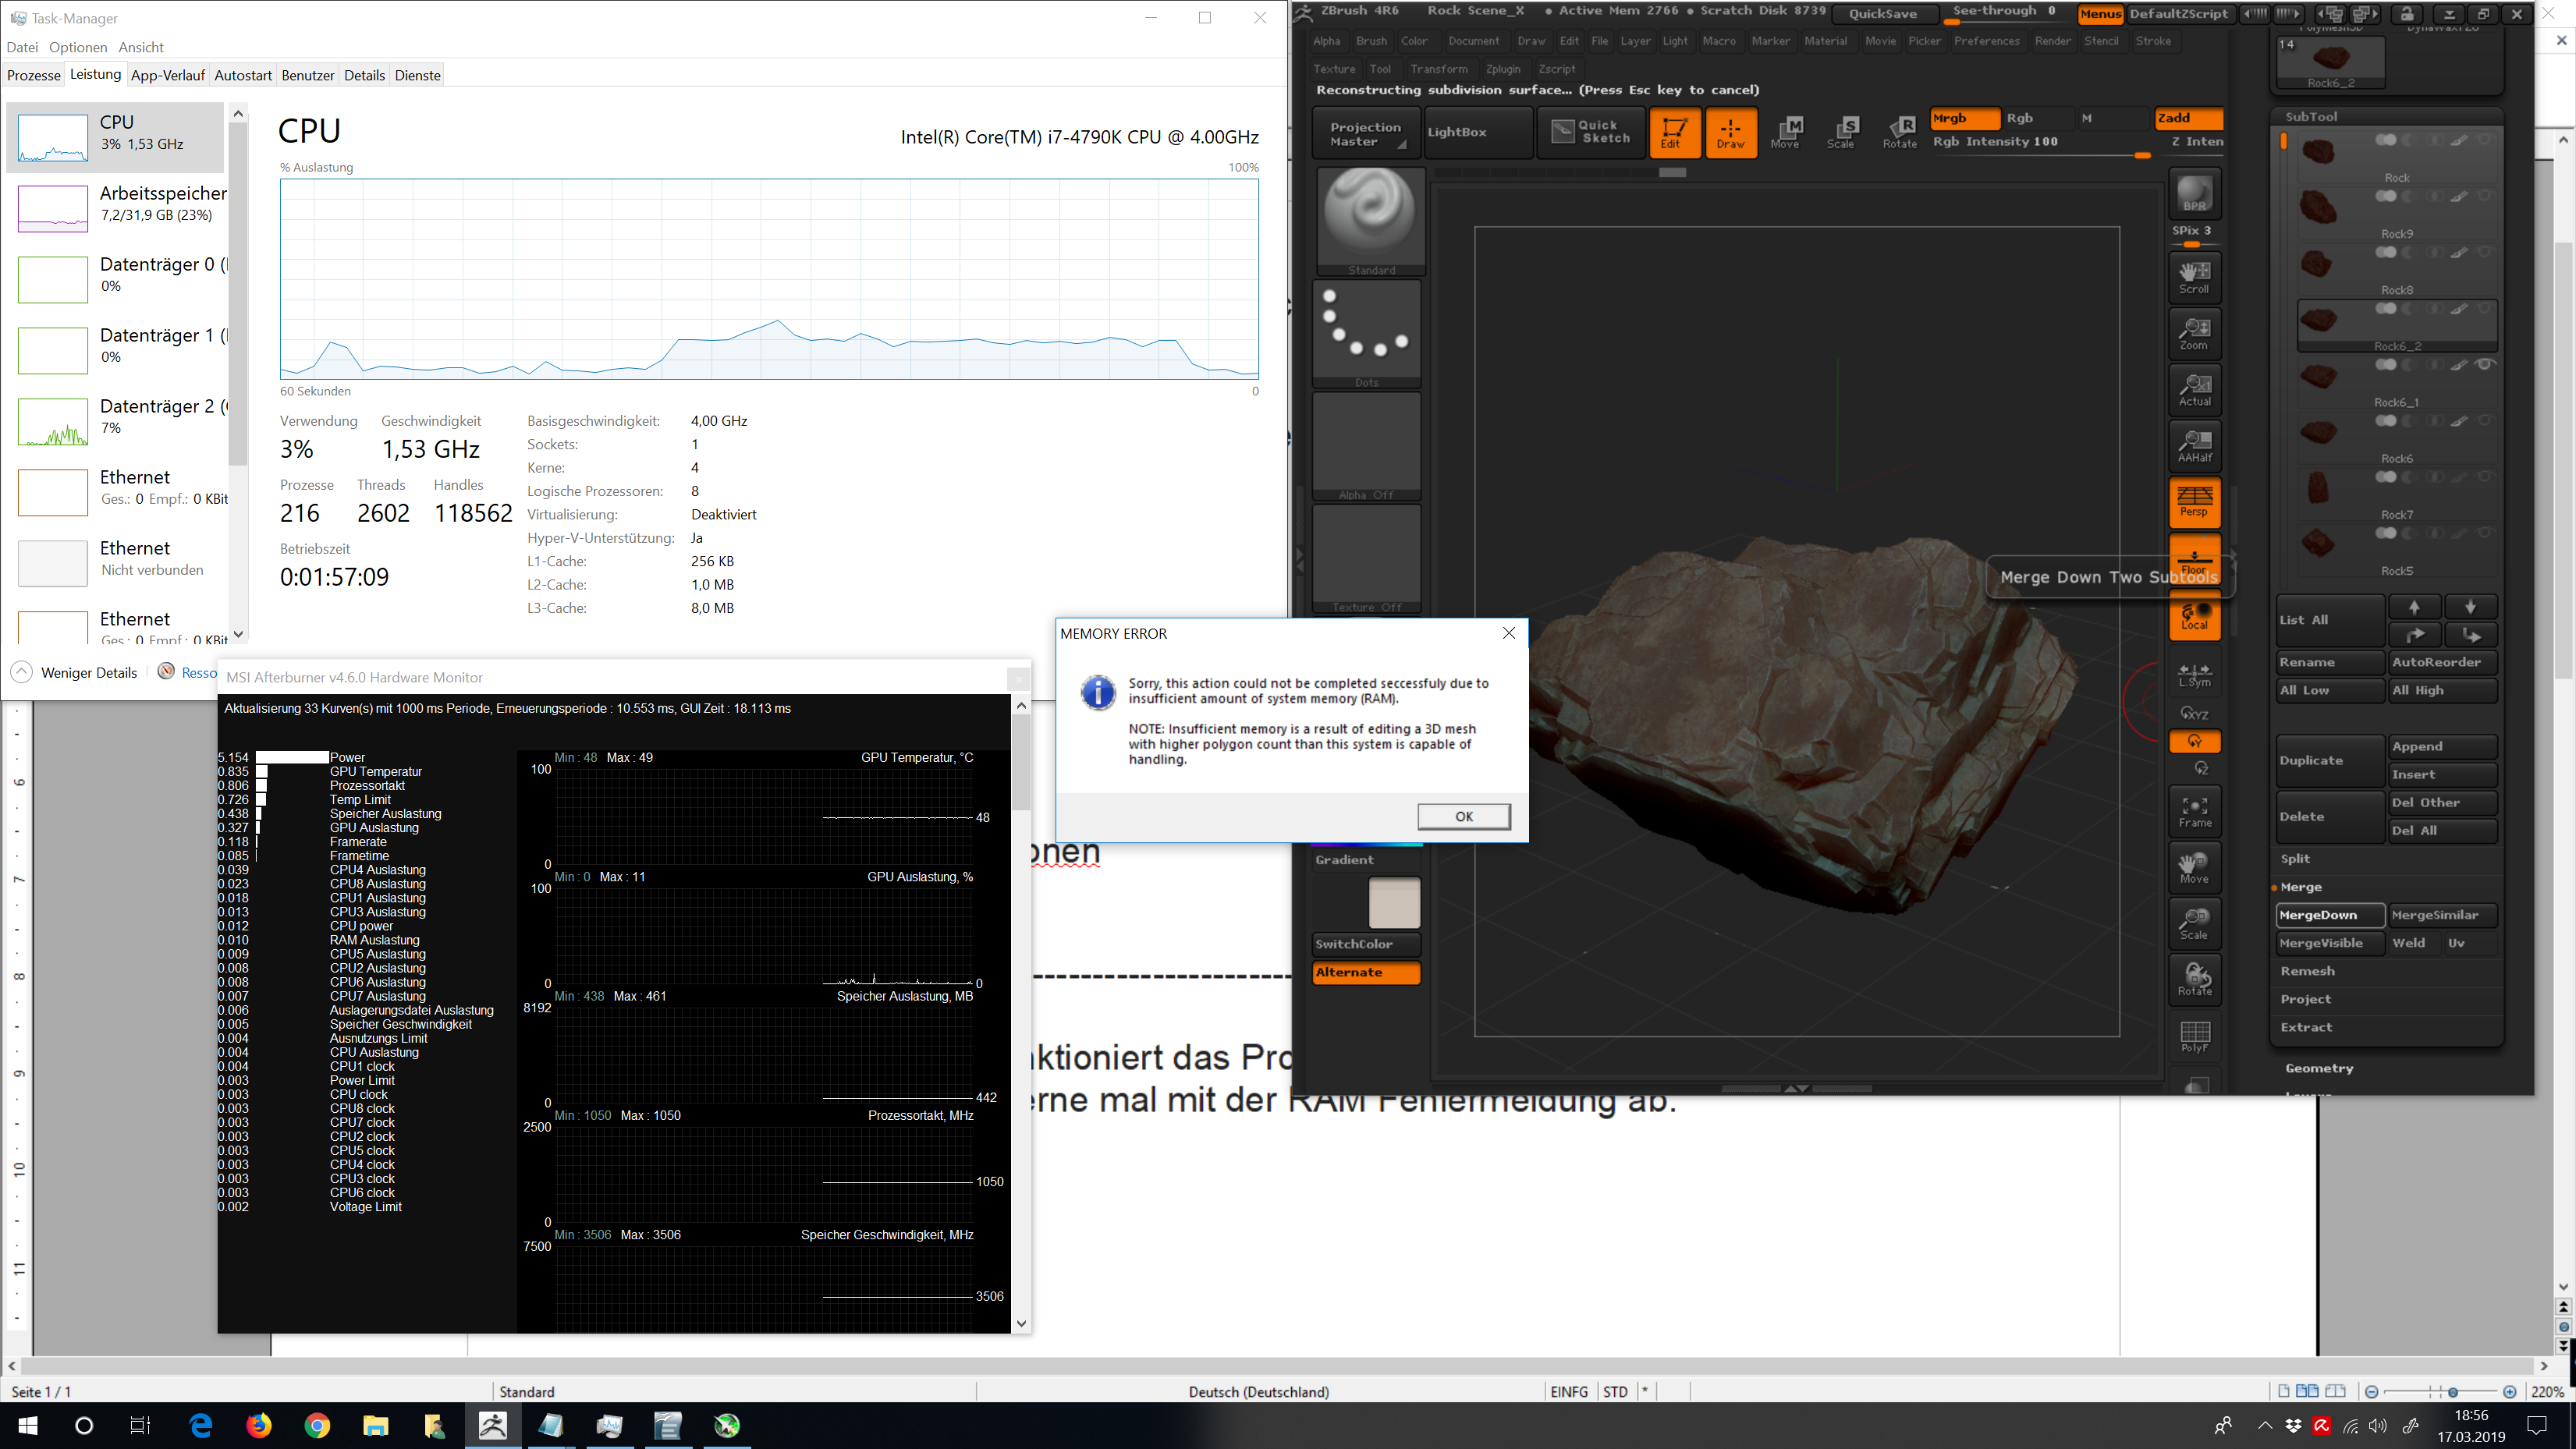 every action in zbrush increases used ram by 400 mb